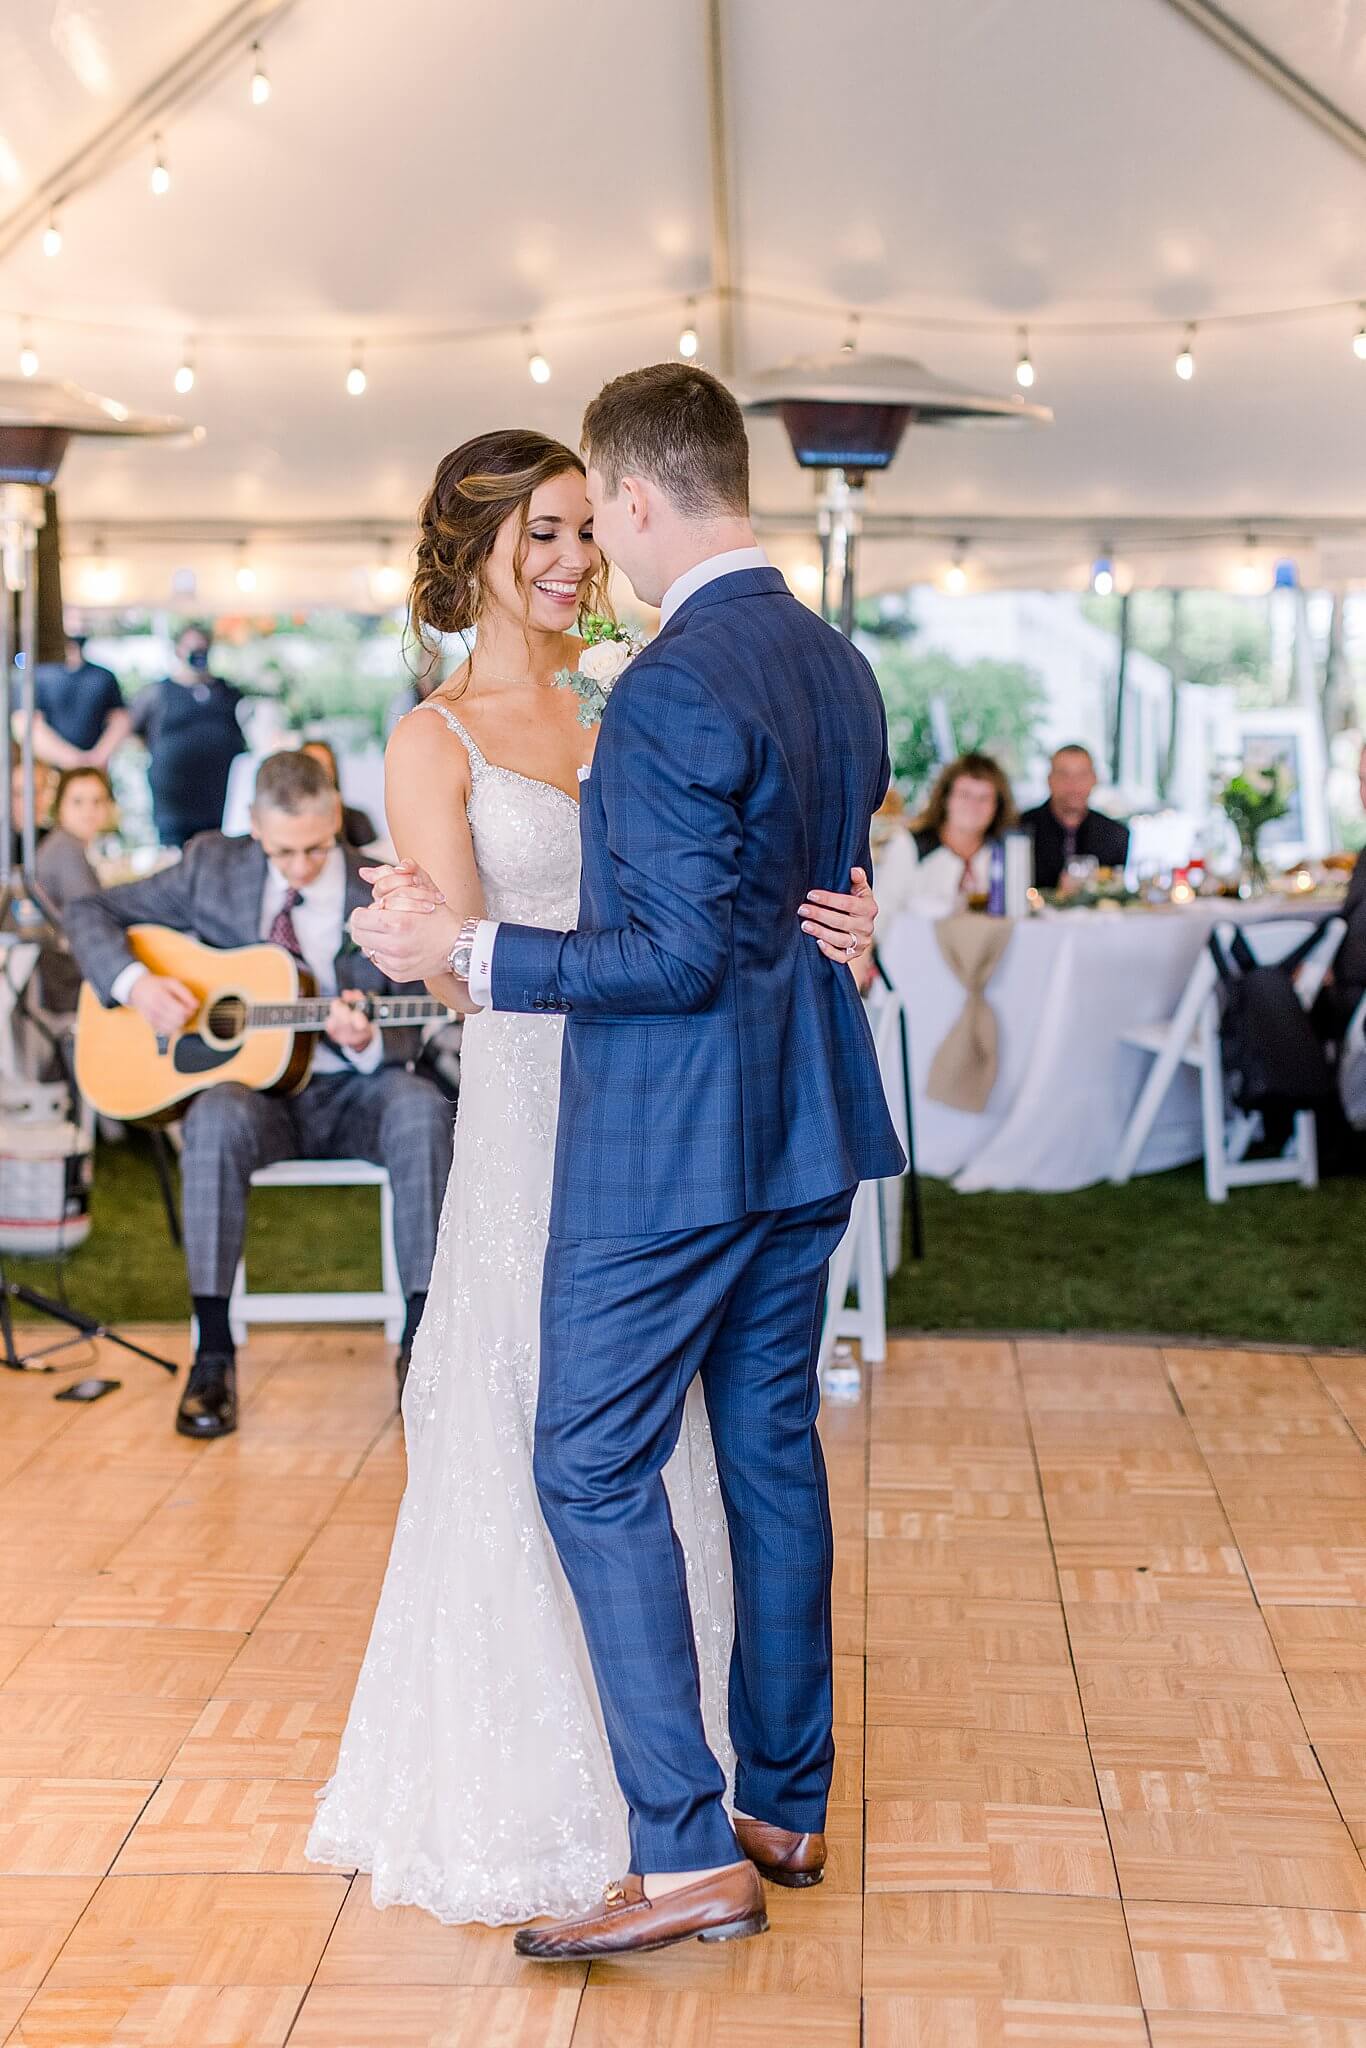 Bride and groom share first dance during Intimate Northern Michigan Wedding reception.